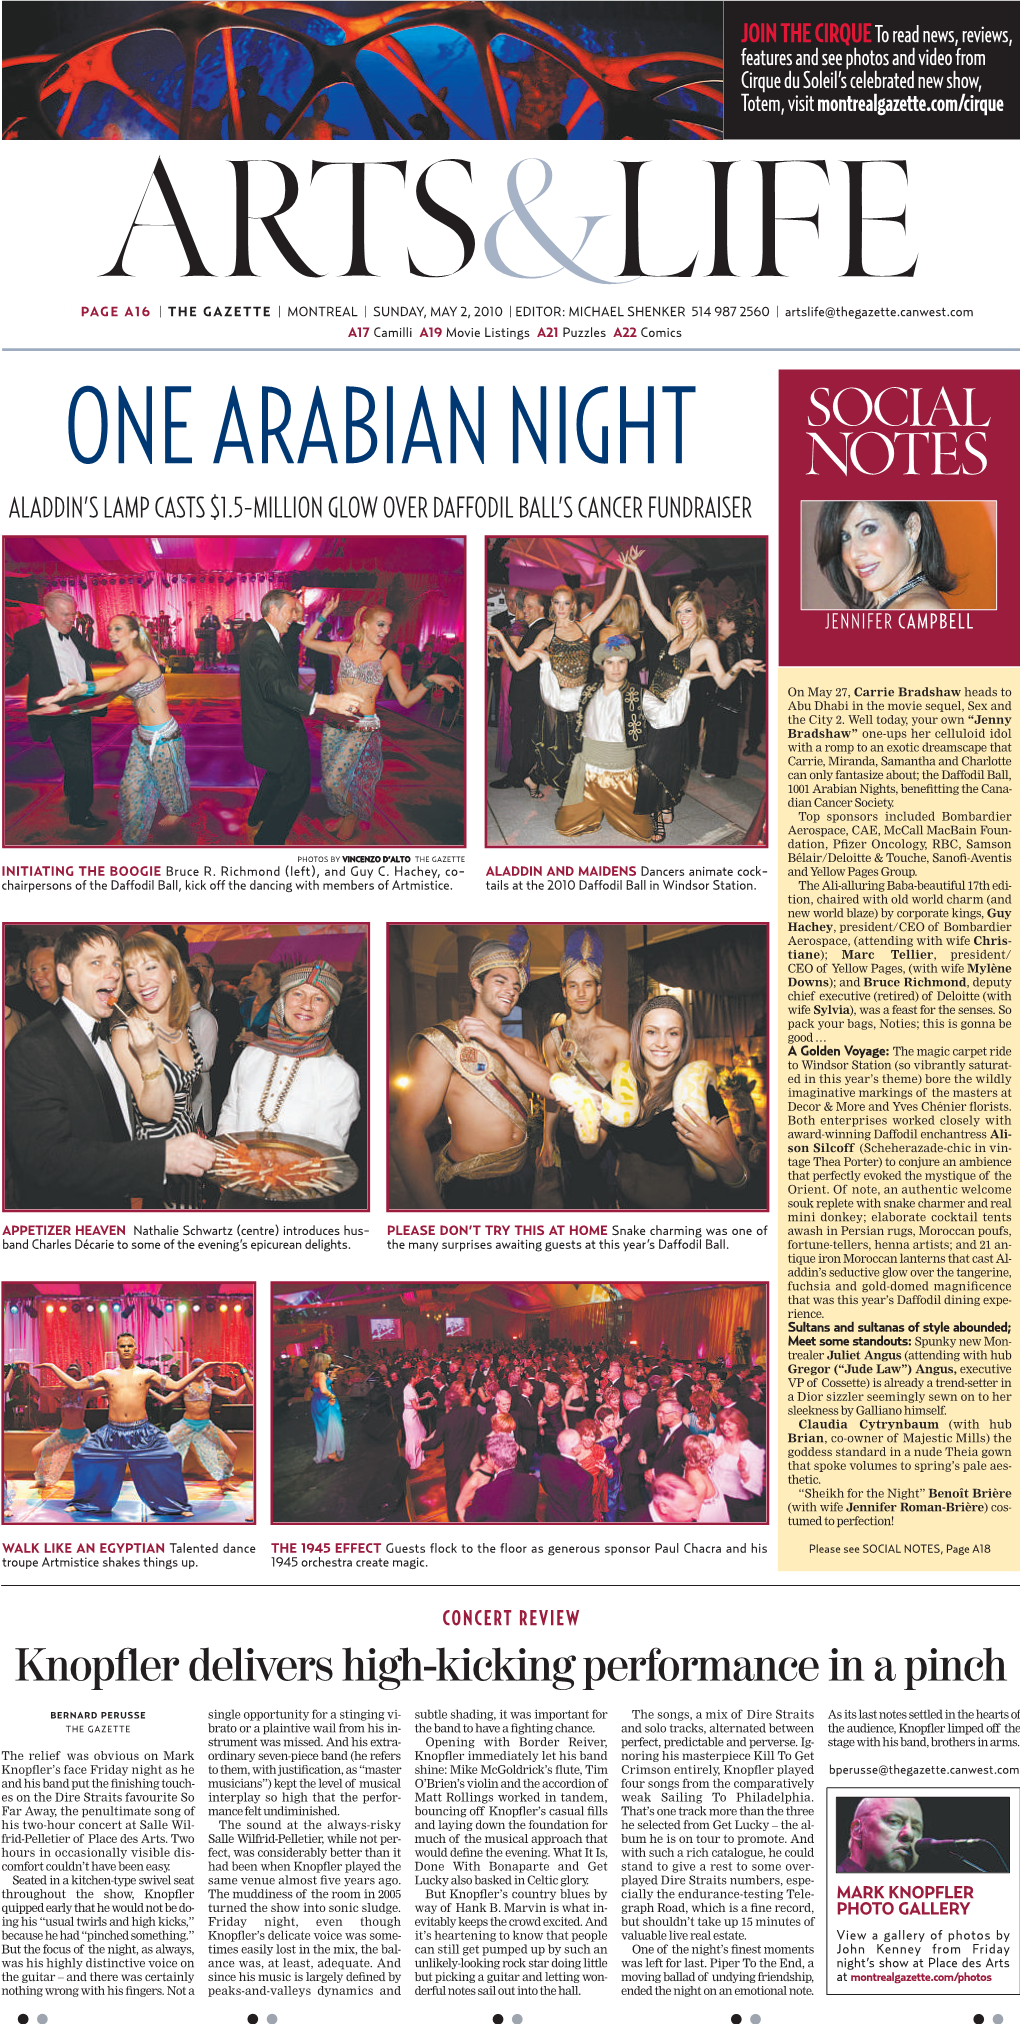 Social One Arabian Night Notes Aladdin’S Lamp Casts $1.5-Million Glow Over Daffodil Ball’S Cancer Fundraiser